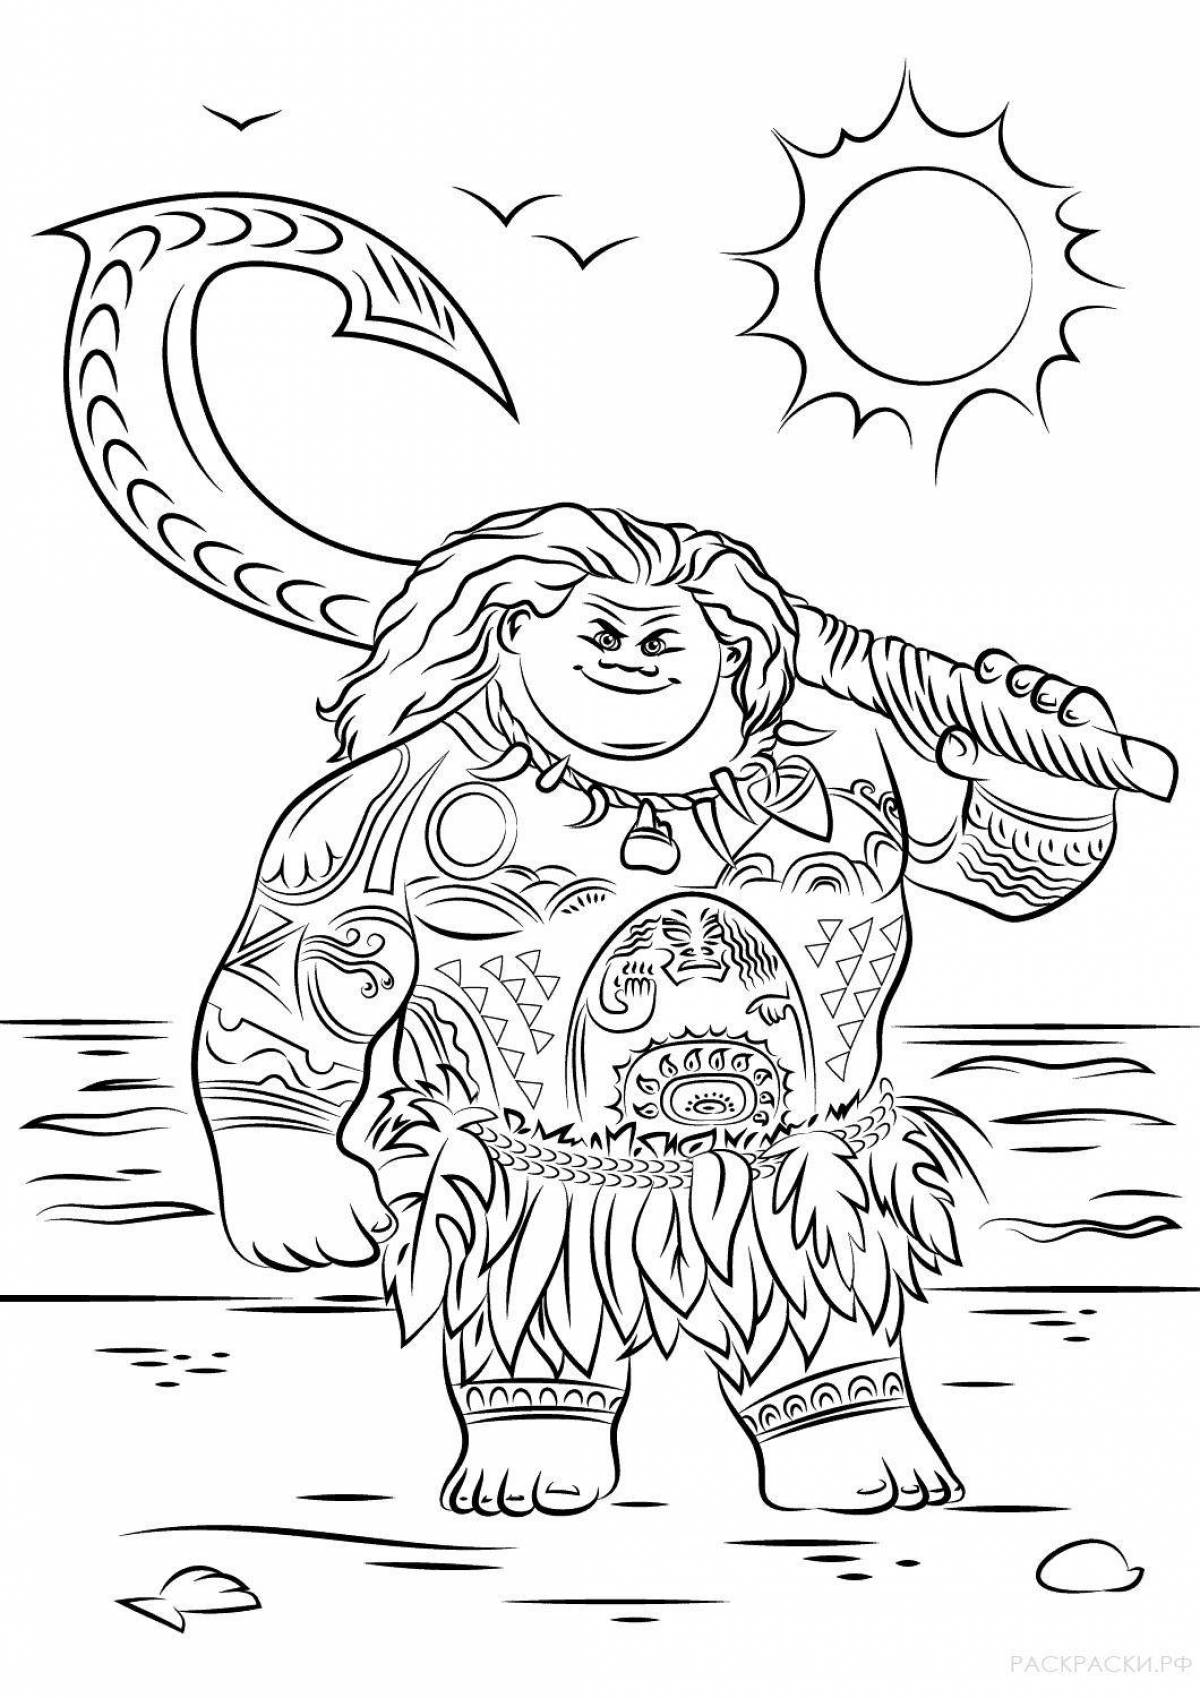 Moana coloring book for kids